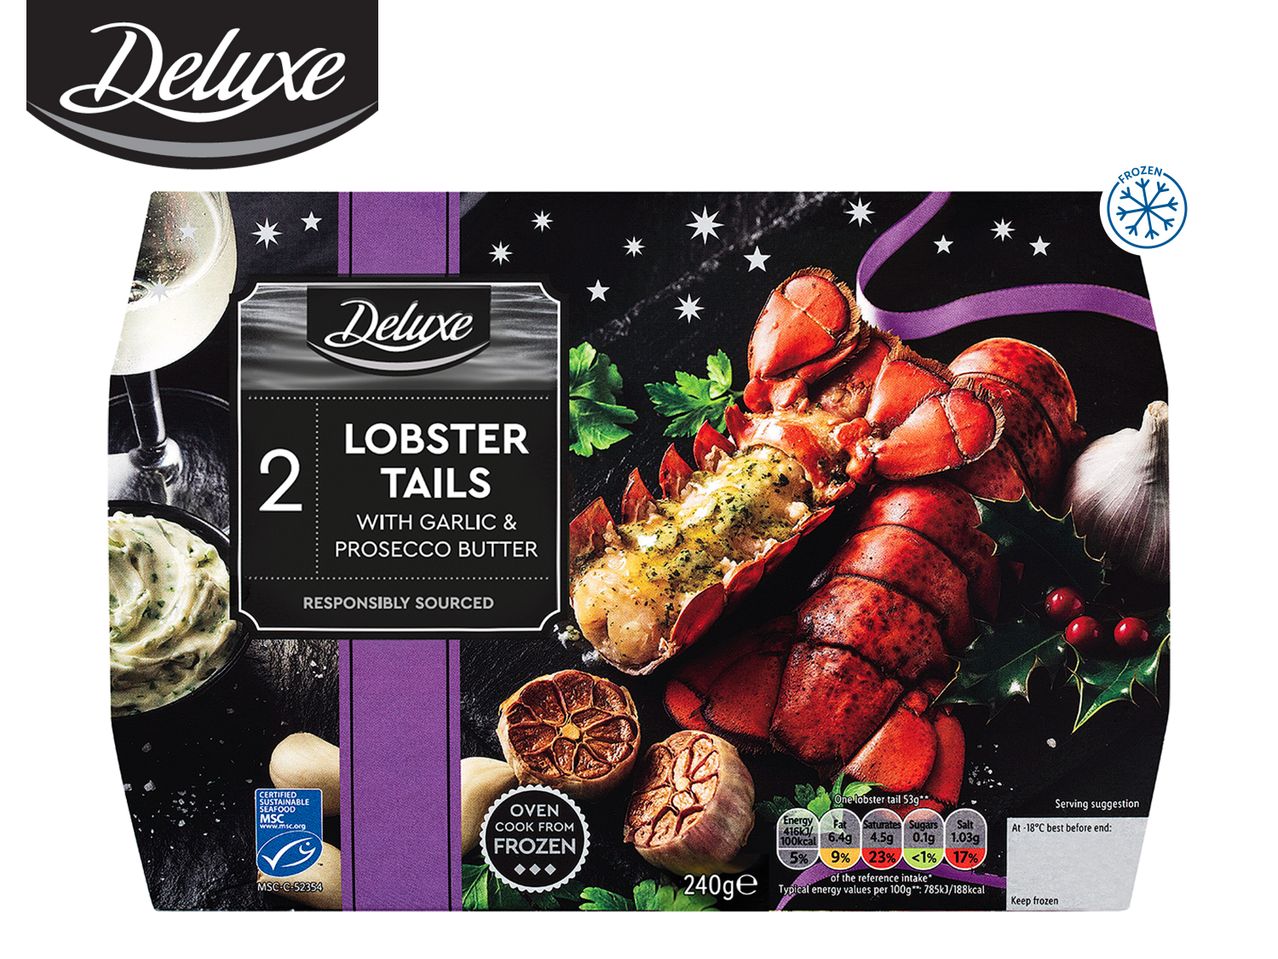 Go to full screen view: Deluxe Lobster Tails with Flavoured Butter - Image 2